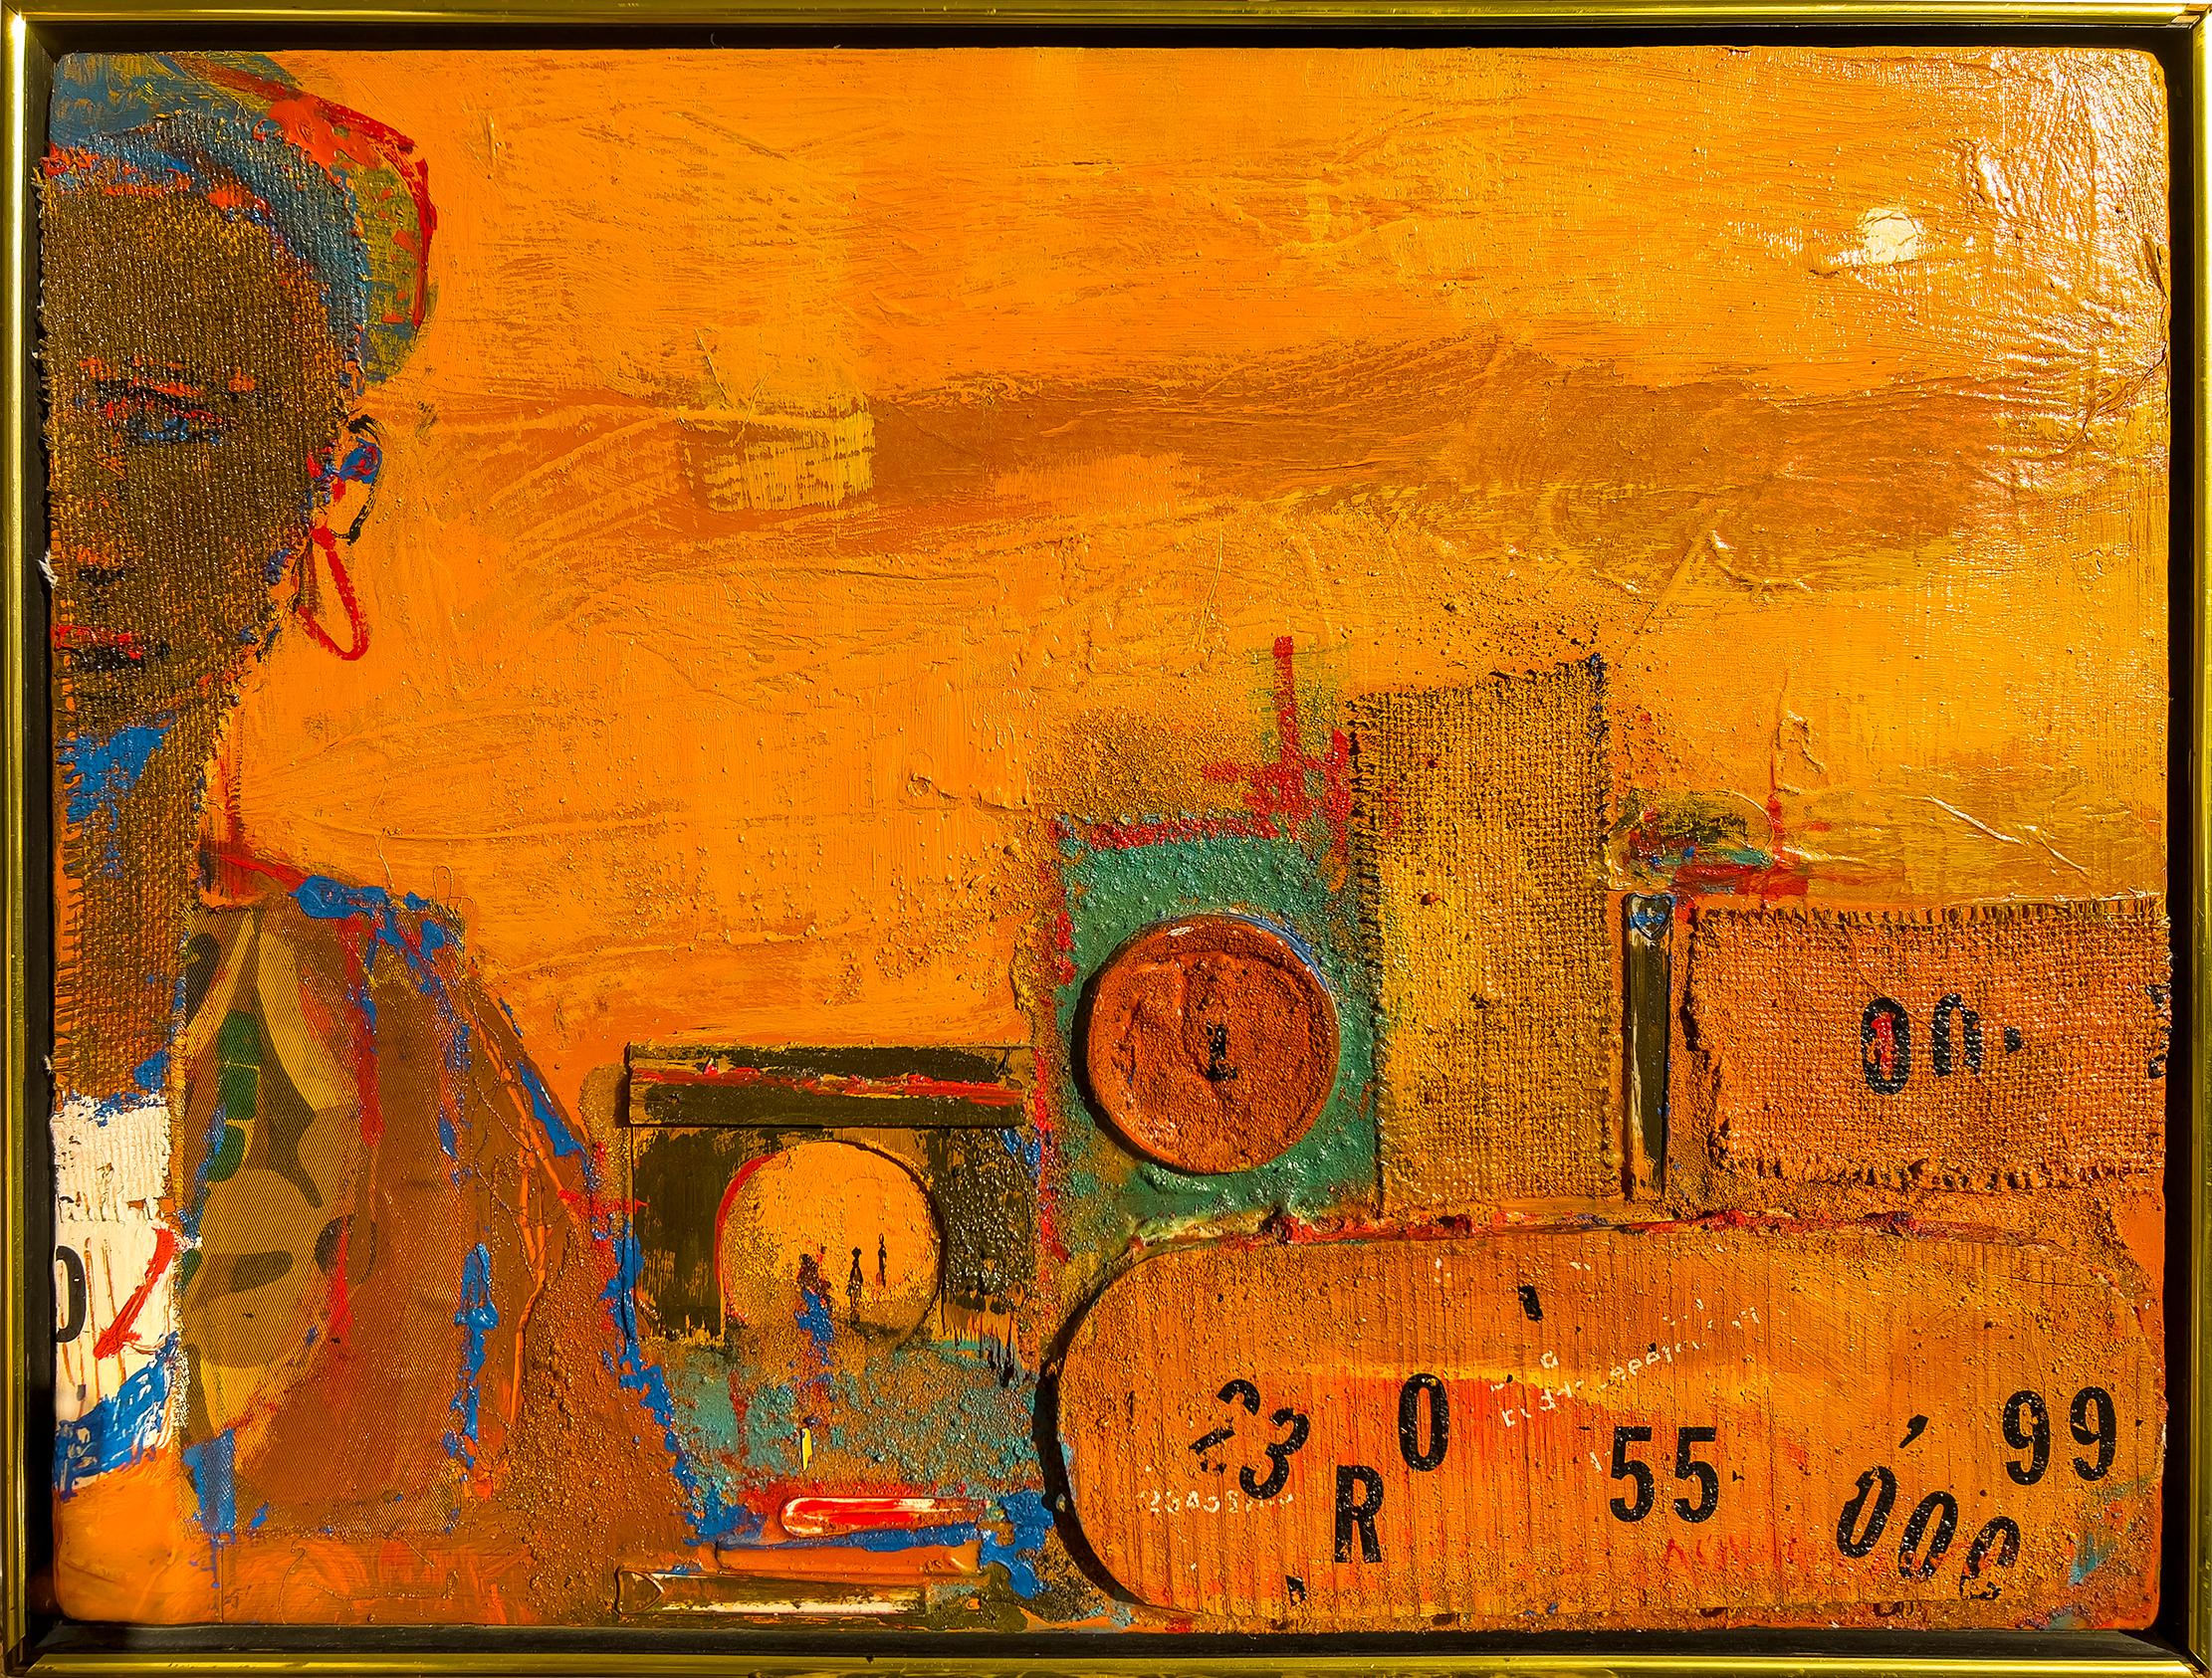 Africa - Collage Painting in Orange - African American Artist  - Mixed Media Art by Alvin Hollingsworth 